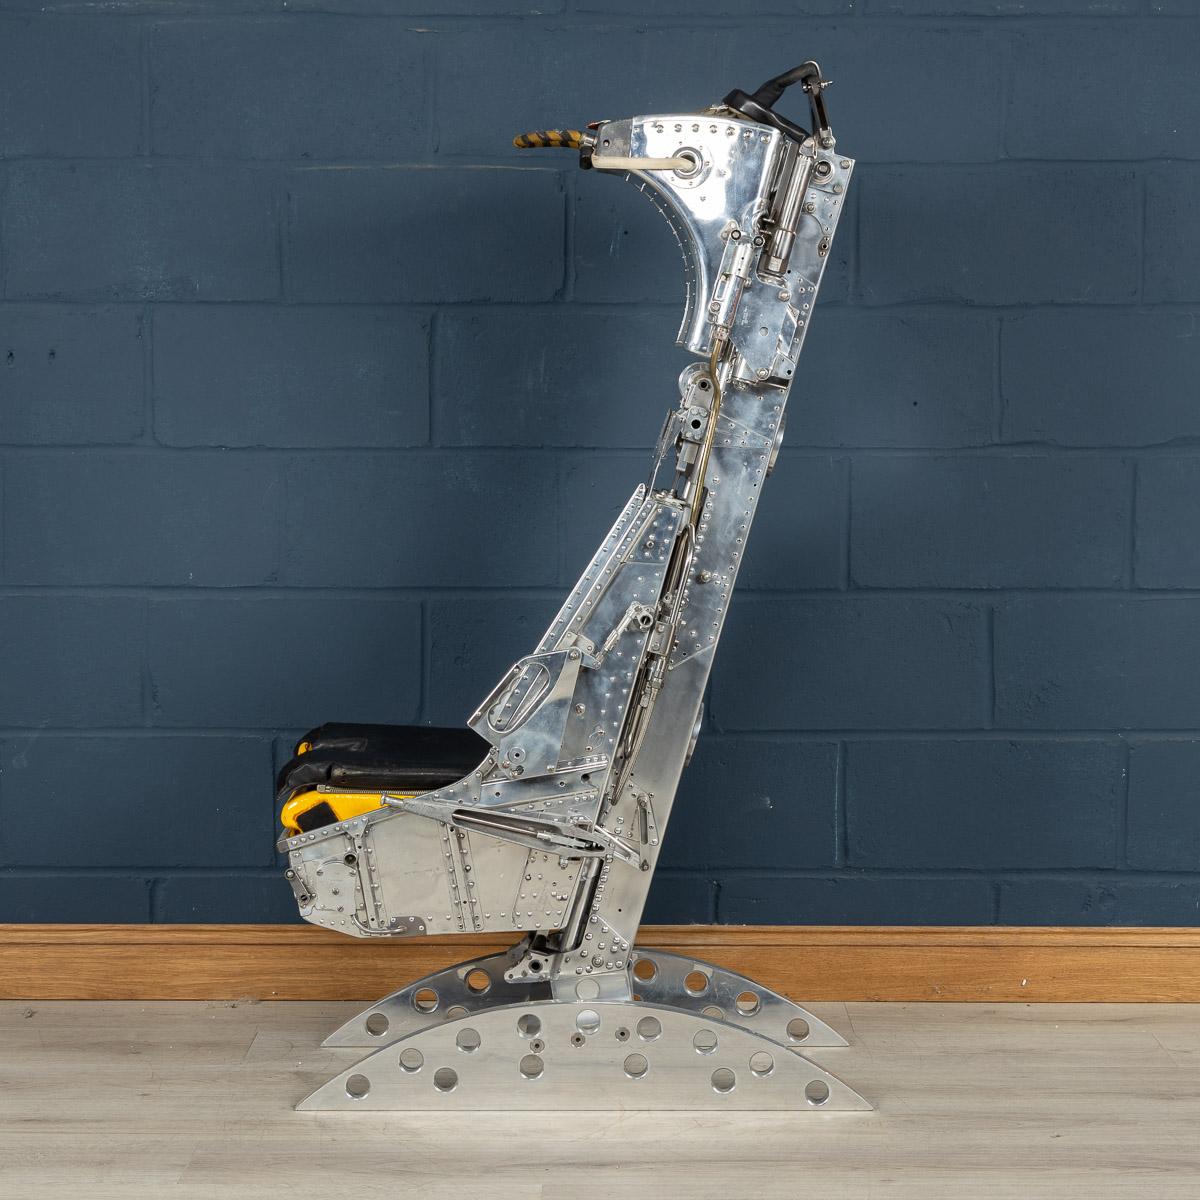 A fantastic ejection seat made by Martin Baker made for the Royal Air Force Canberra Jet which were in operation in the early 1960s. This superbly detailed, highly polished ejection seat with bespoke leather seat is now a fully functional chair. The